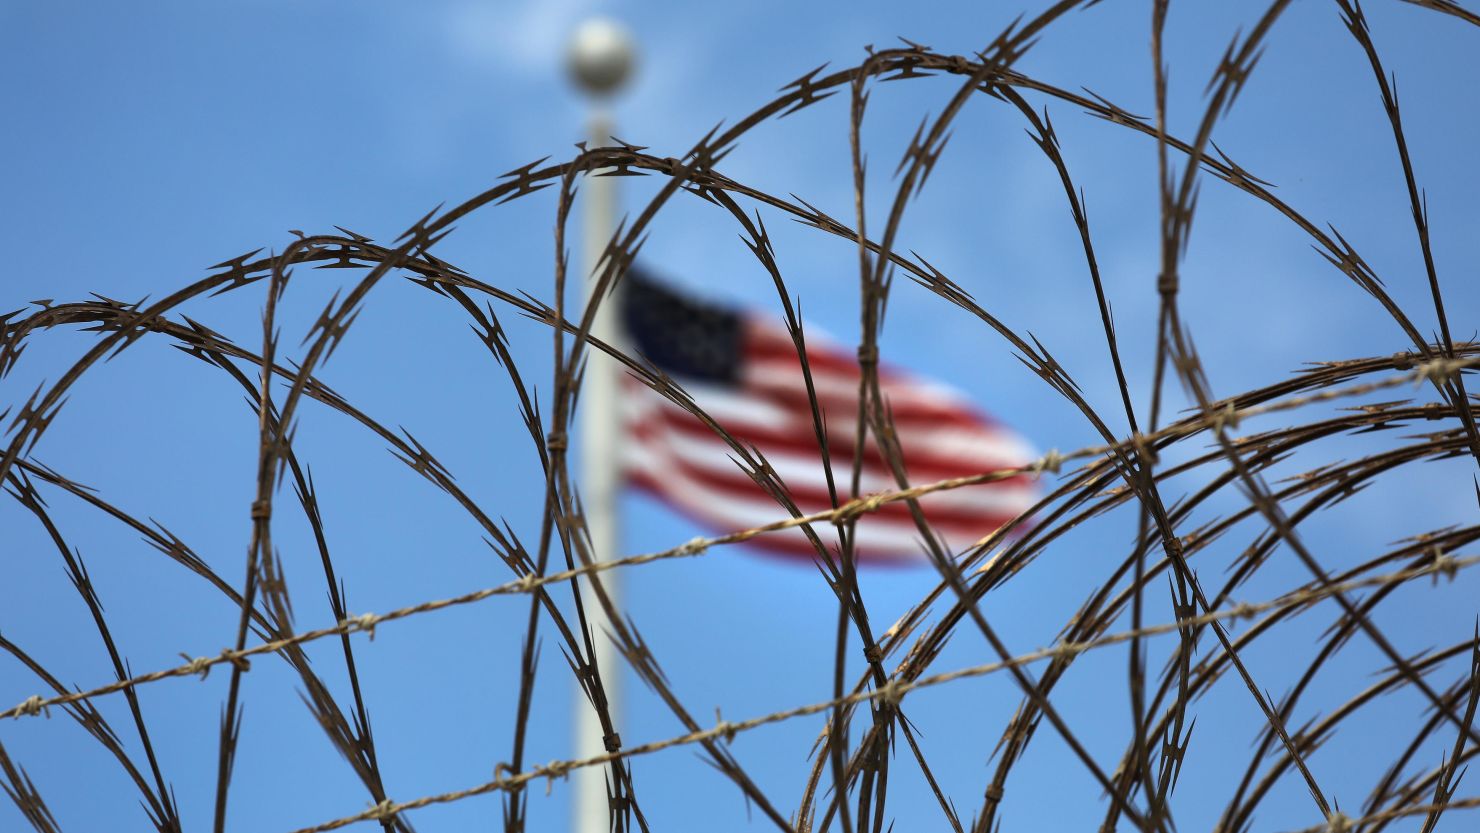 Razor wire tops the fence of the US prison at Guantanamo Bay in this library photo.